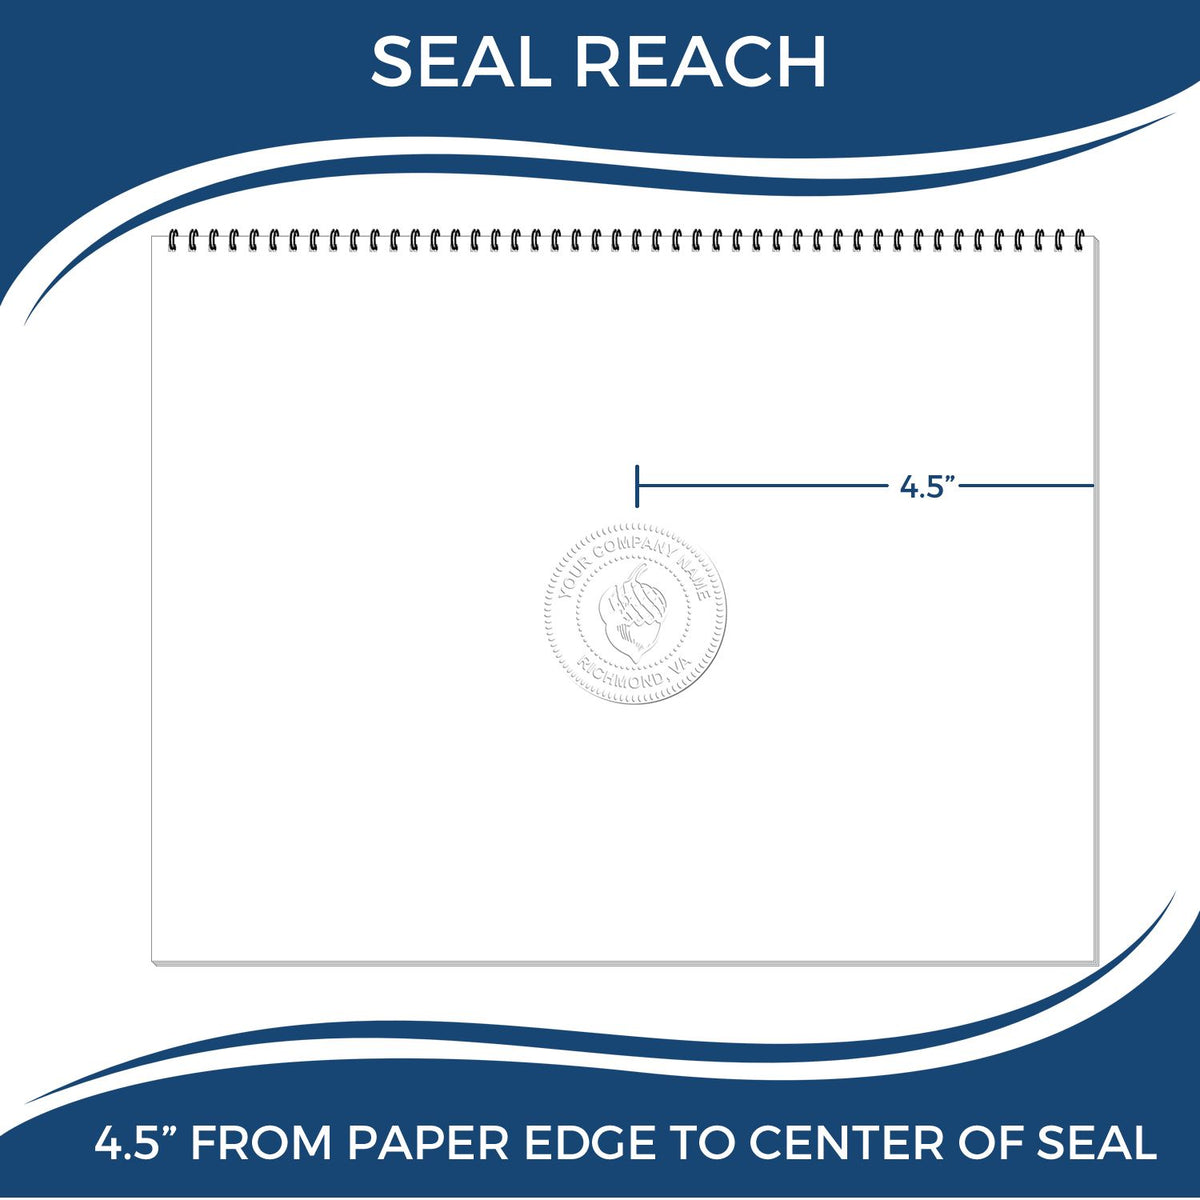 An infographic showing the seal reach which is represented by a ruler and a miniature seal image of the State of Mississippi Extended Long Reach Engineer Seal